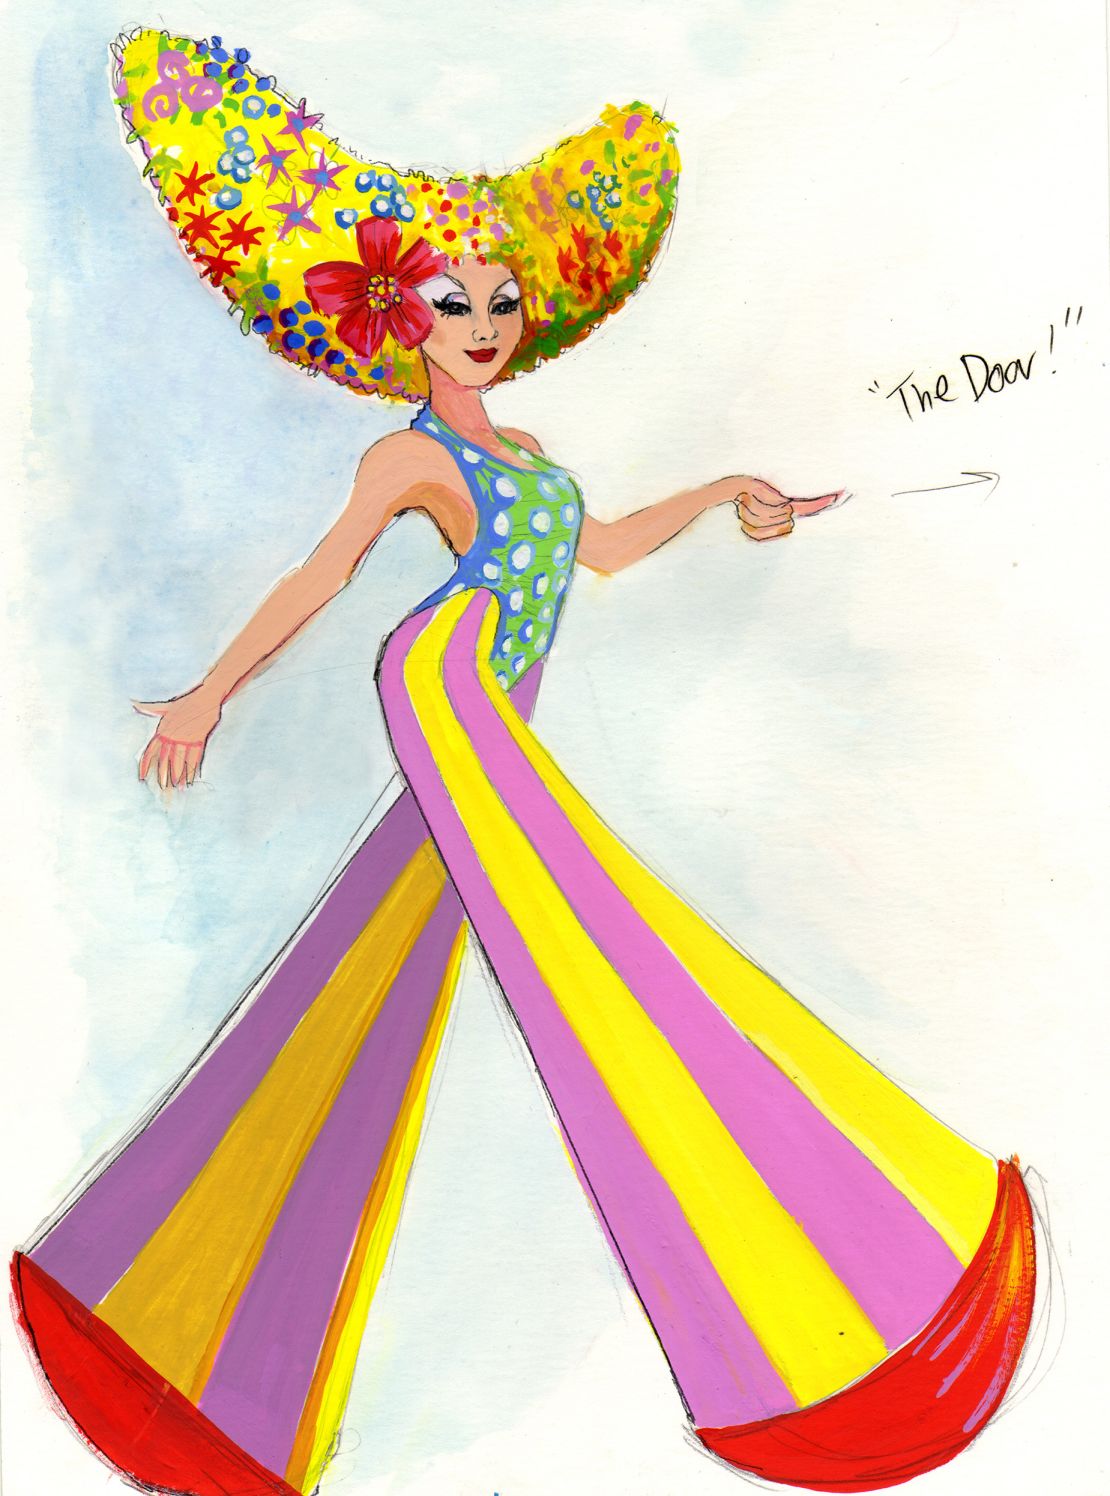 Tim Chappel's costume sketch shows the origins of the floral headpieces and flat-bottomed outfit worn by the principal trio during their performance of 